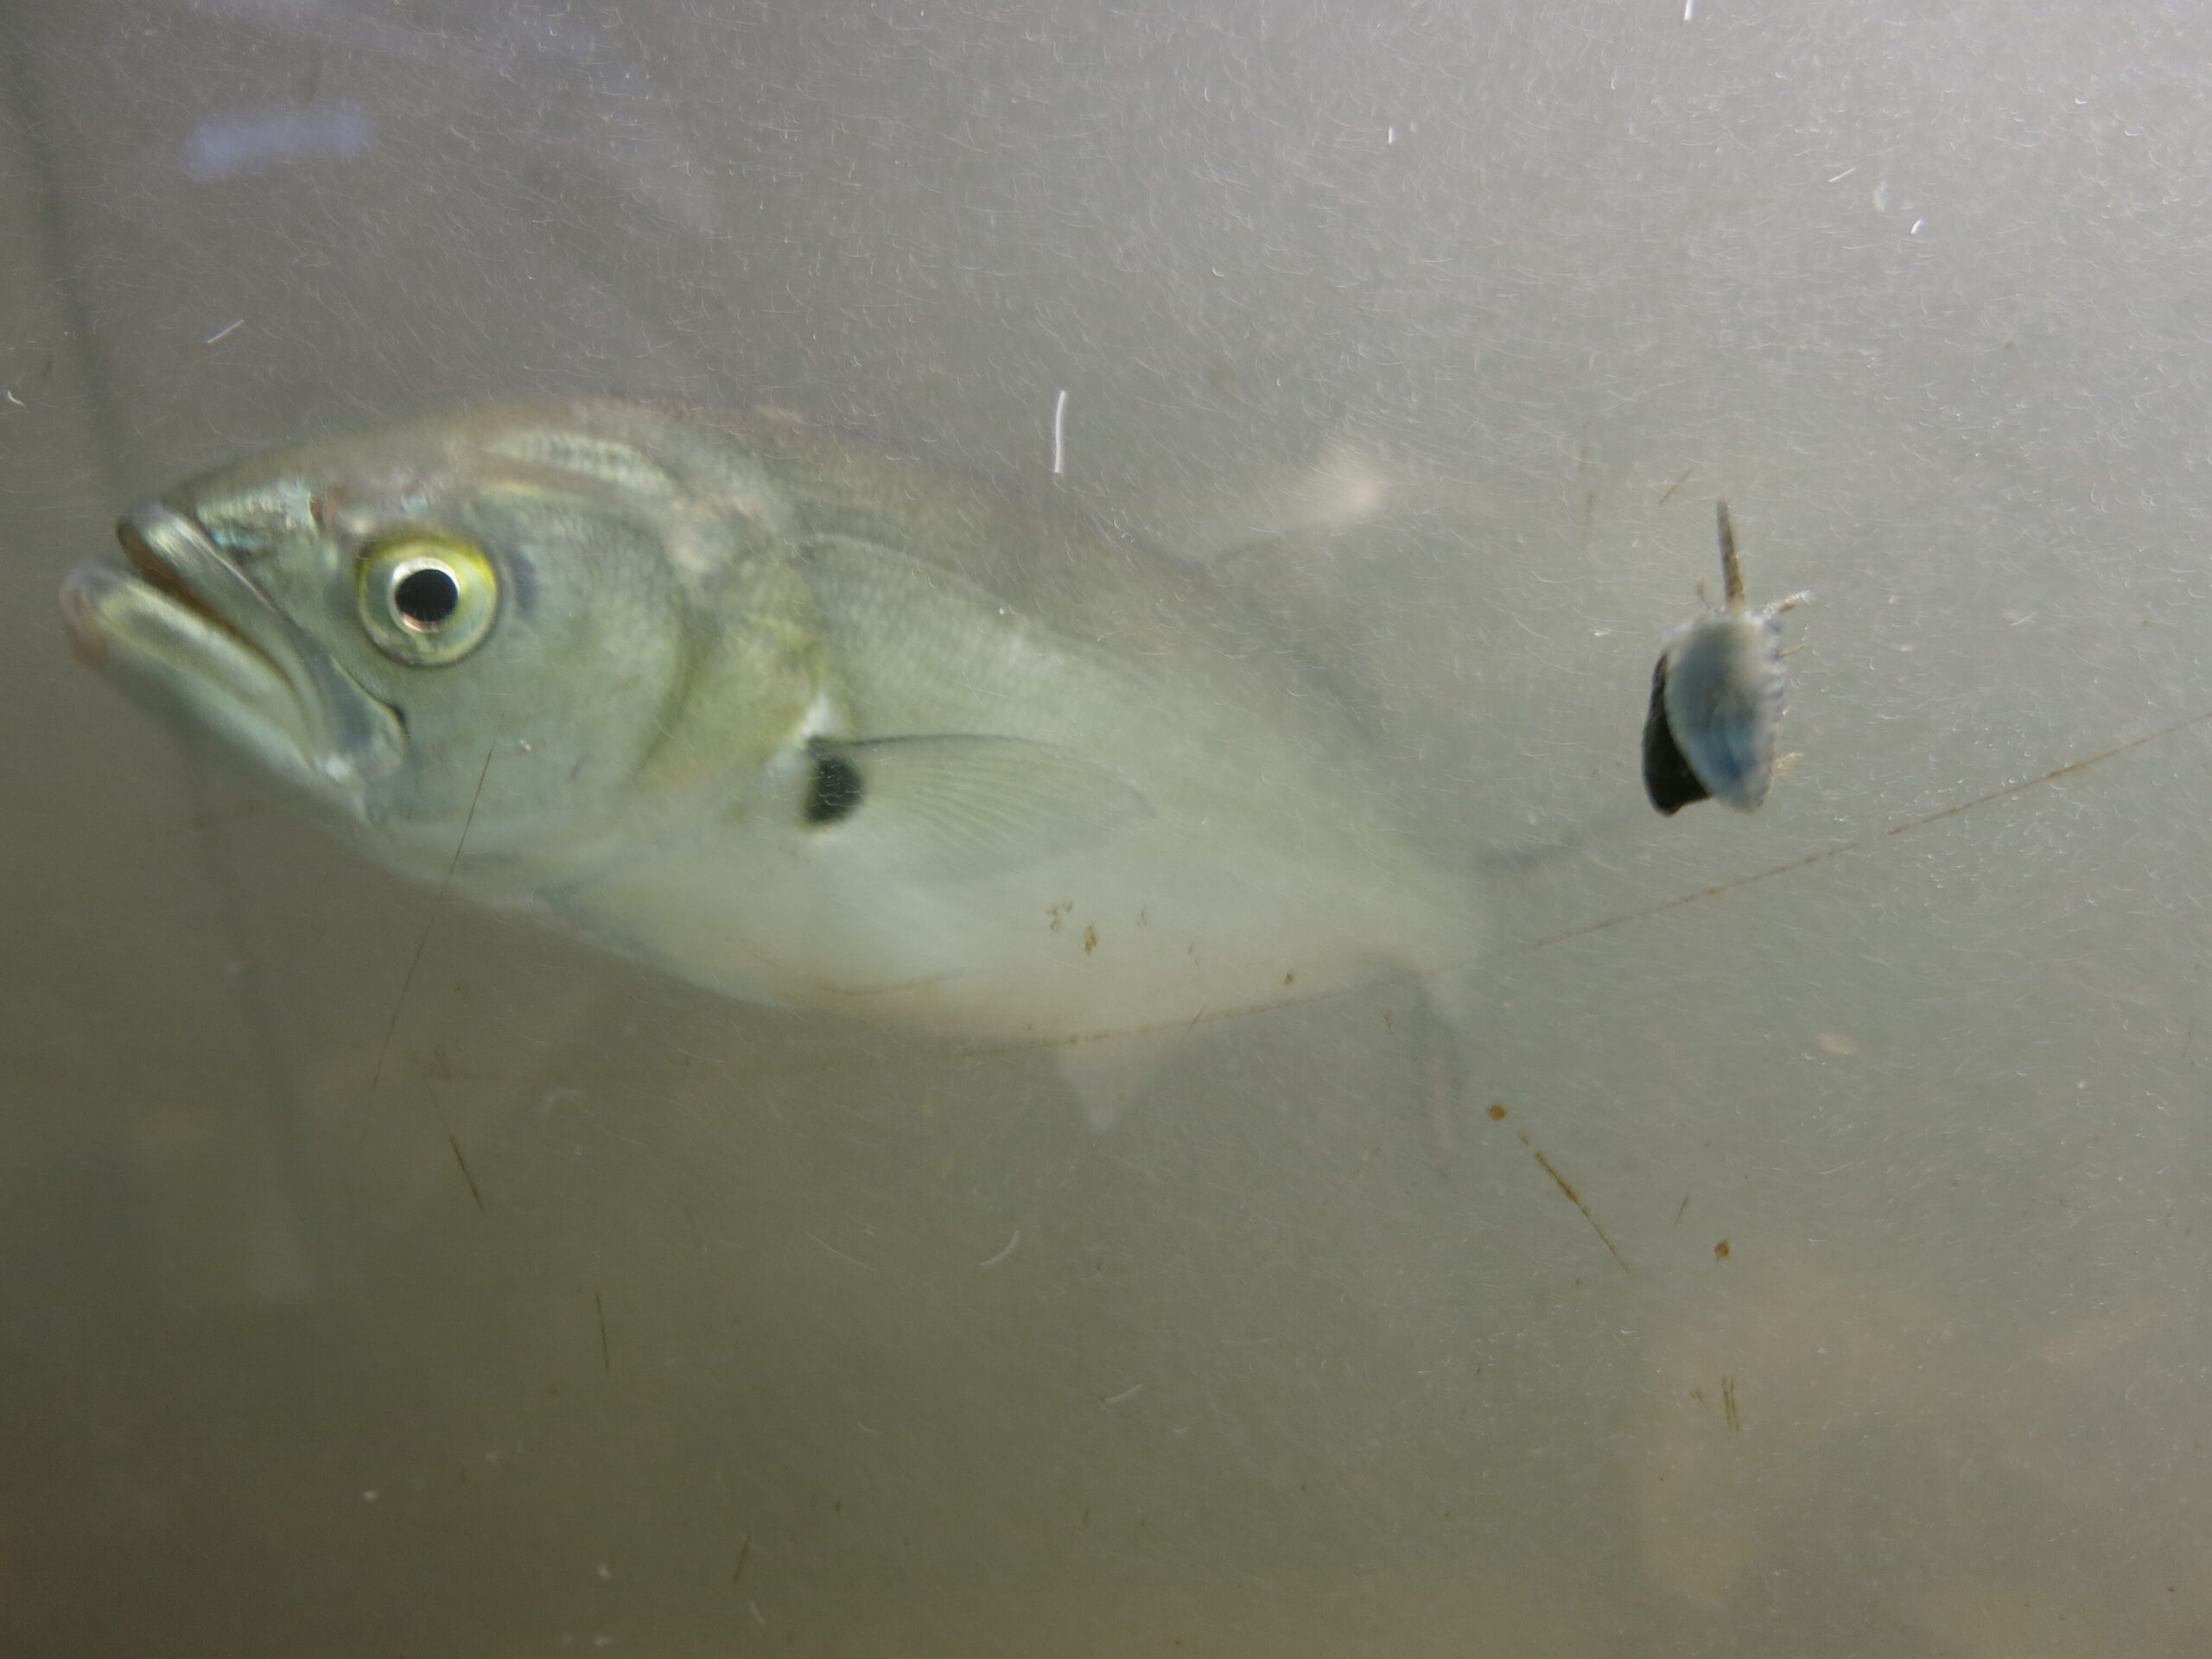 Bluefish closeup with a yellow eye and black pupil